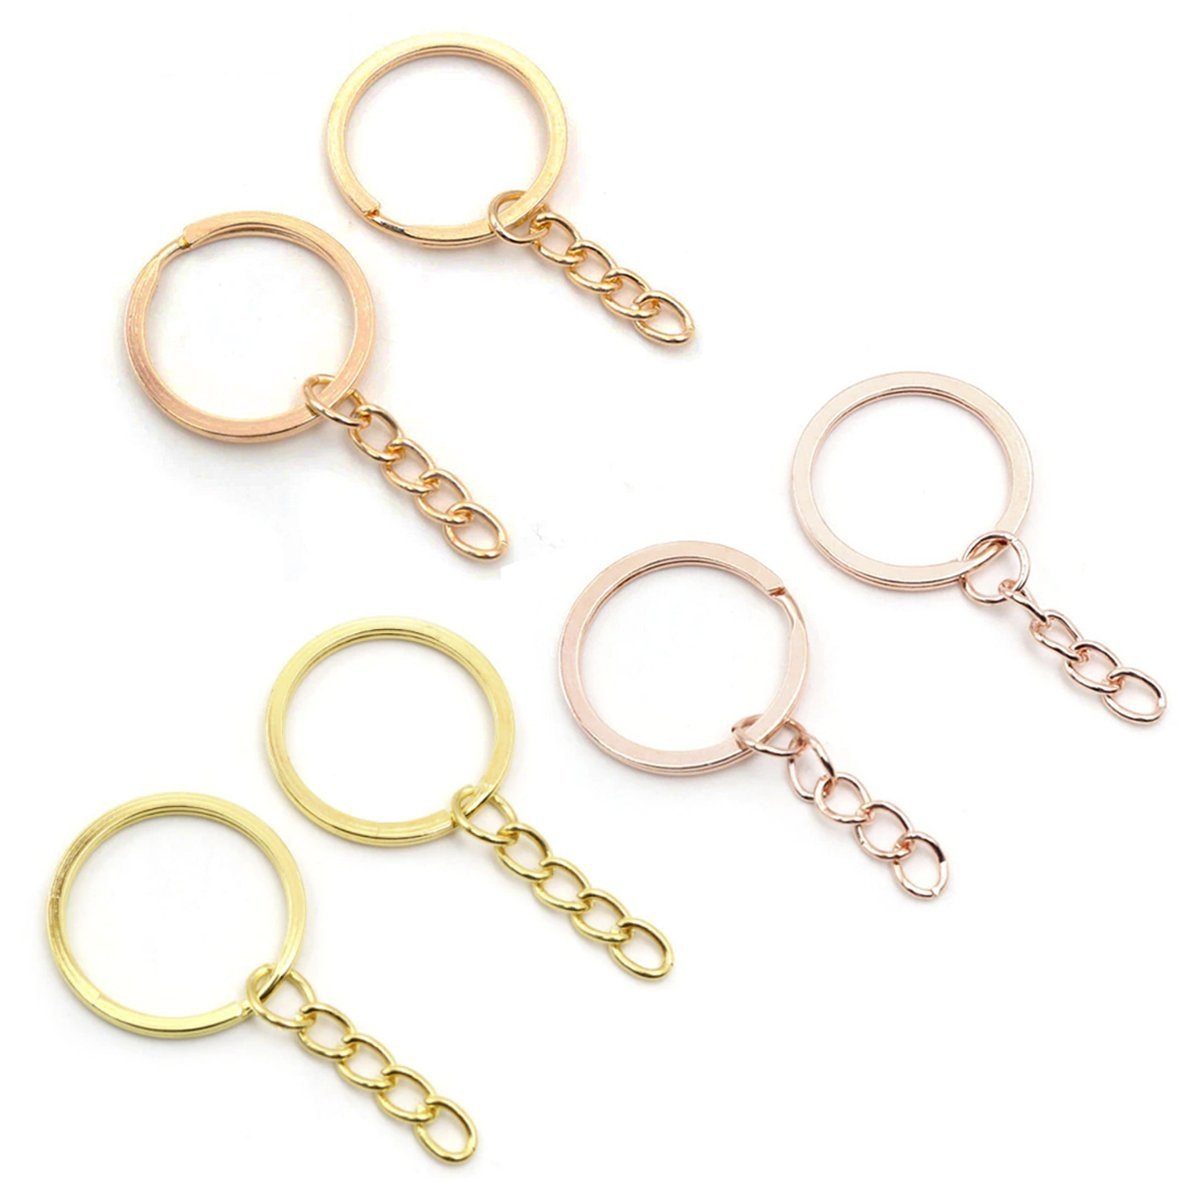 20pcs 25mm Rose Gold Ancient Keyring Keychain Split Ring Chain Key Rings Key Chains - Gold - - Asia Sell